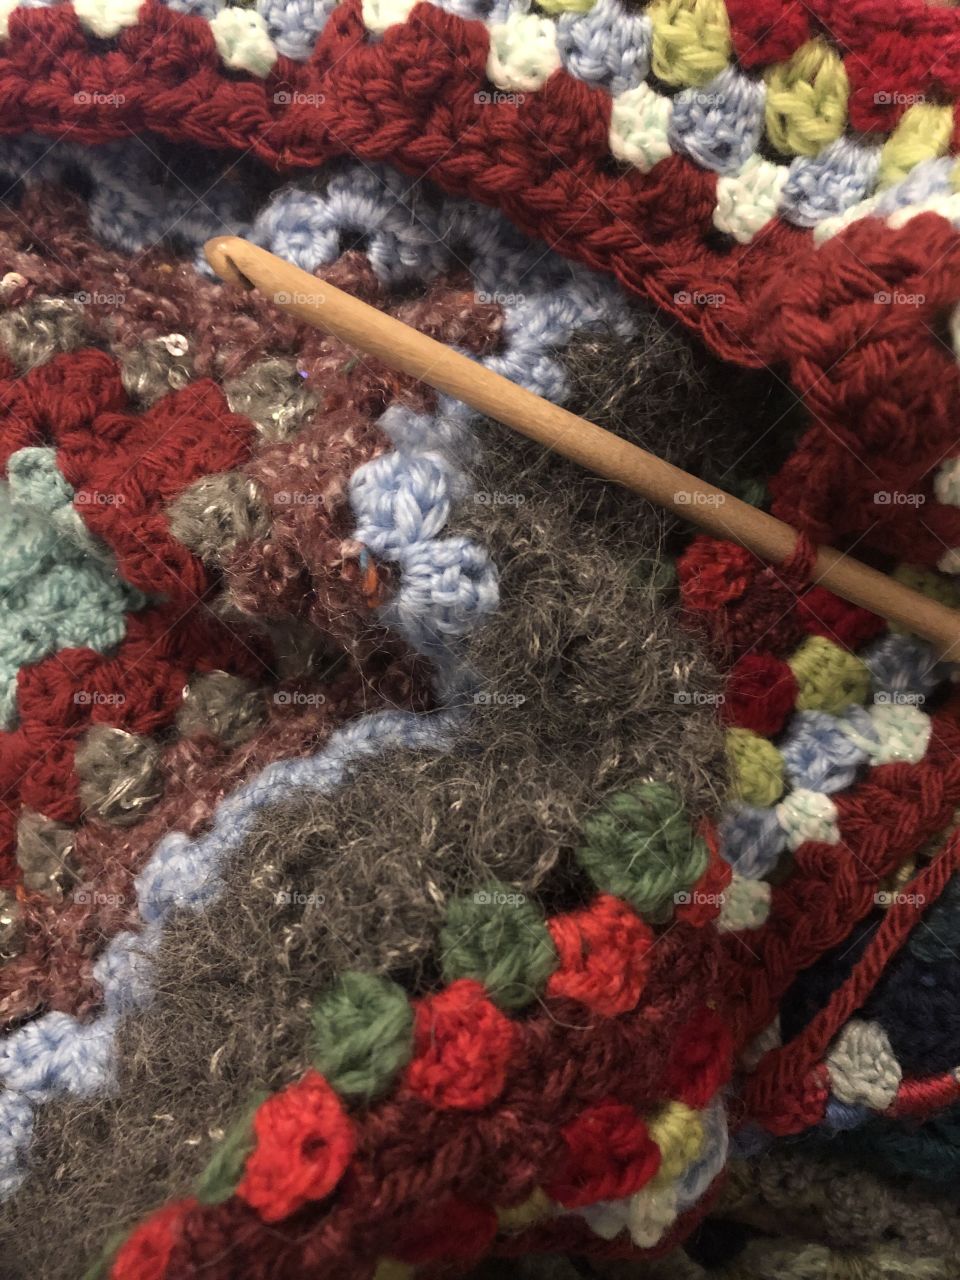 Keeping warm this winter by making a blanket while I’m under it! I love to crochet @evieholdcroft #FoapJan19